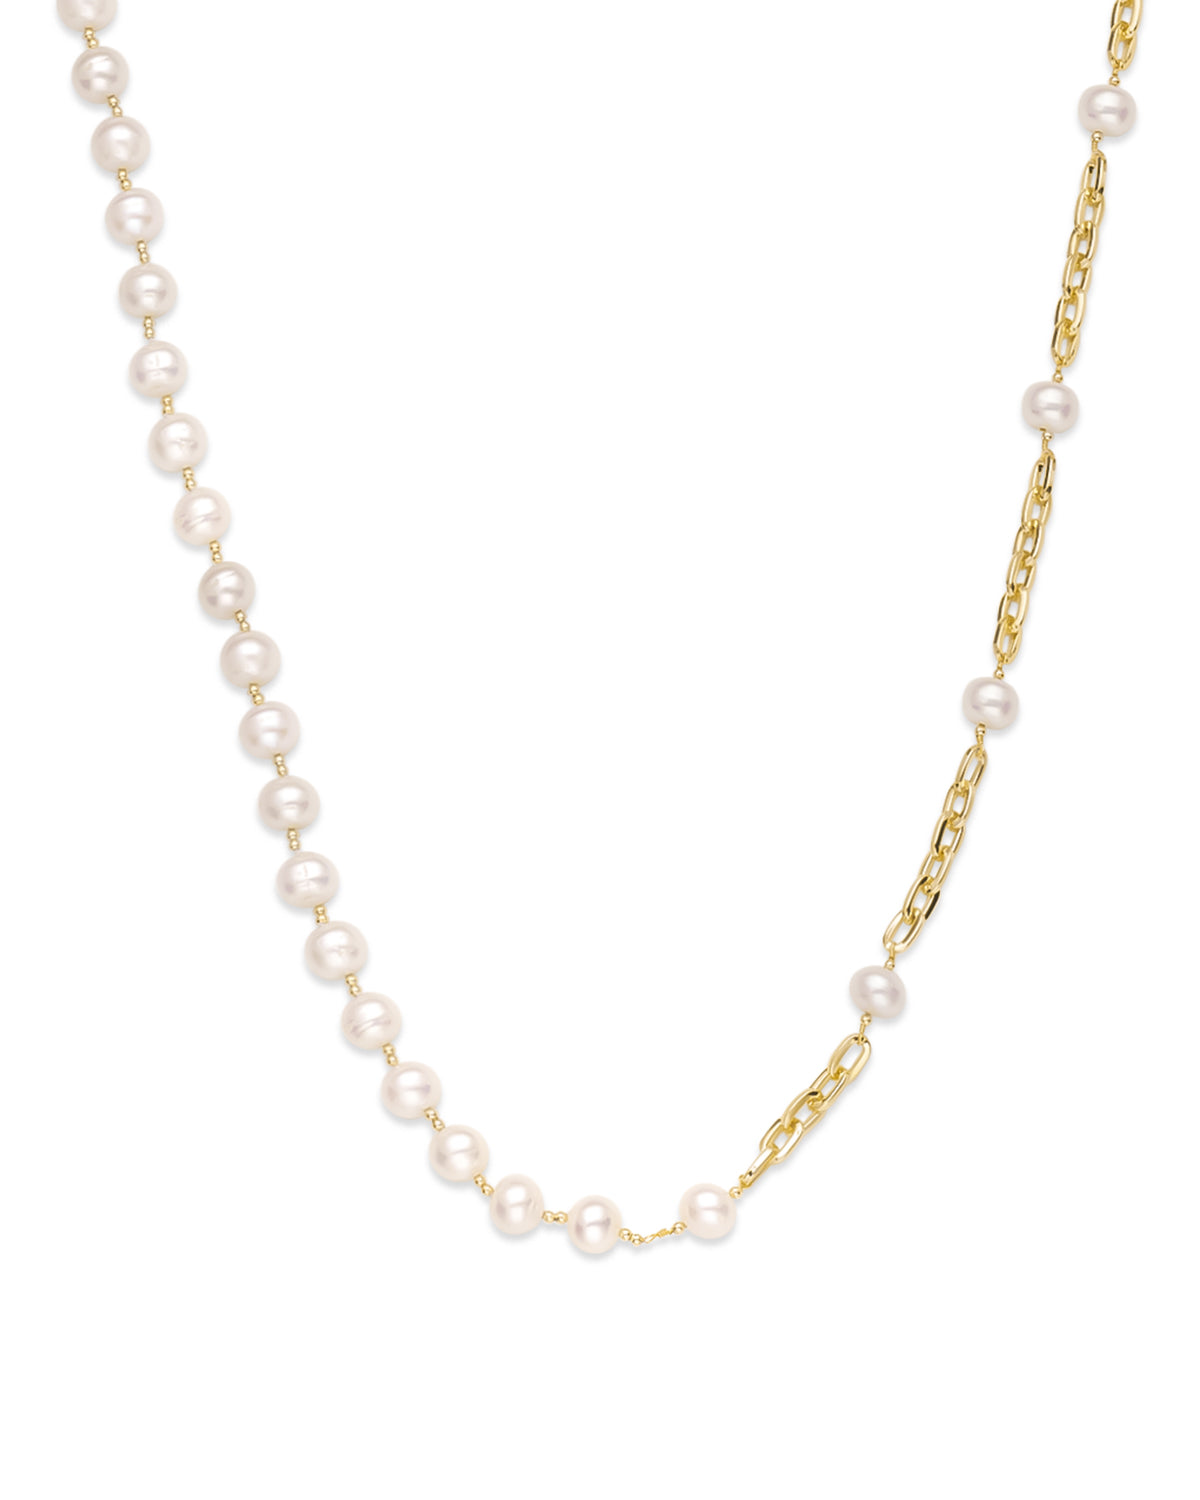 11-12mm White Freshwater Pearl & Chain Link Necklace